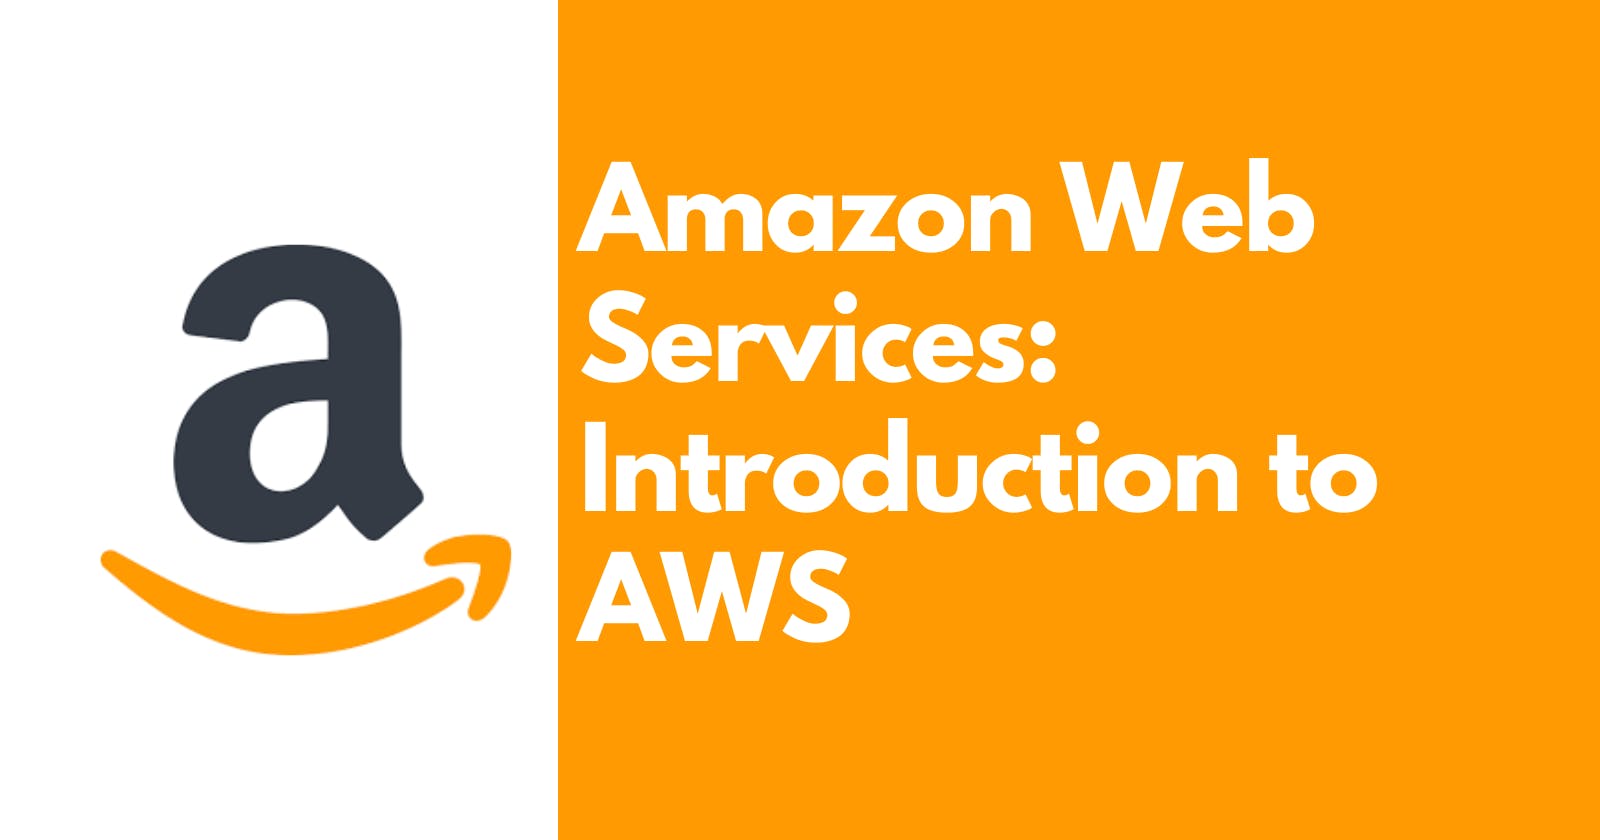 Introduction to AWS: What is it and How Does It Work?